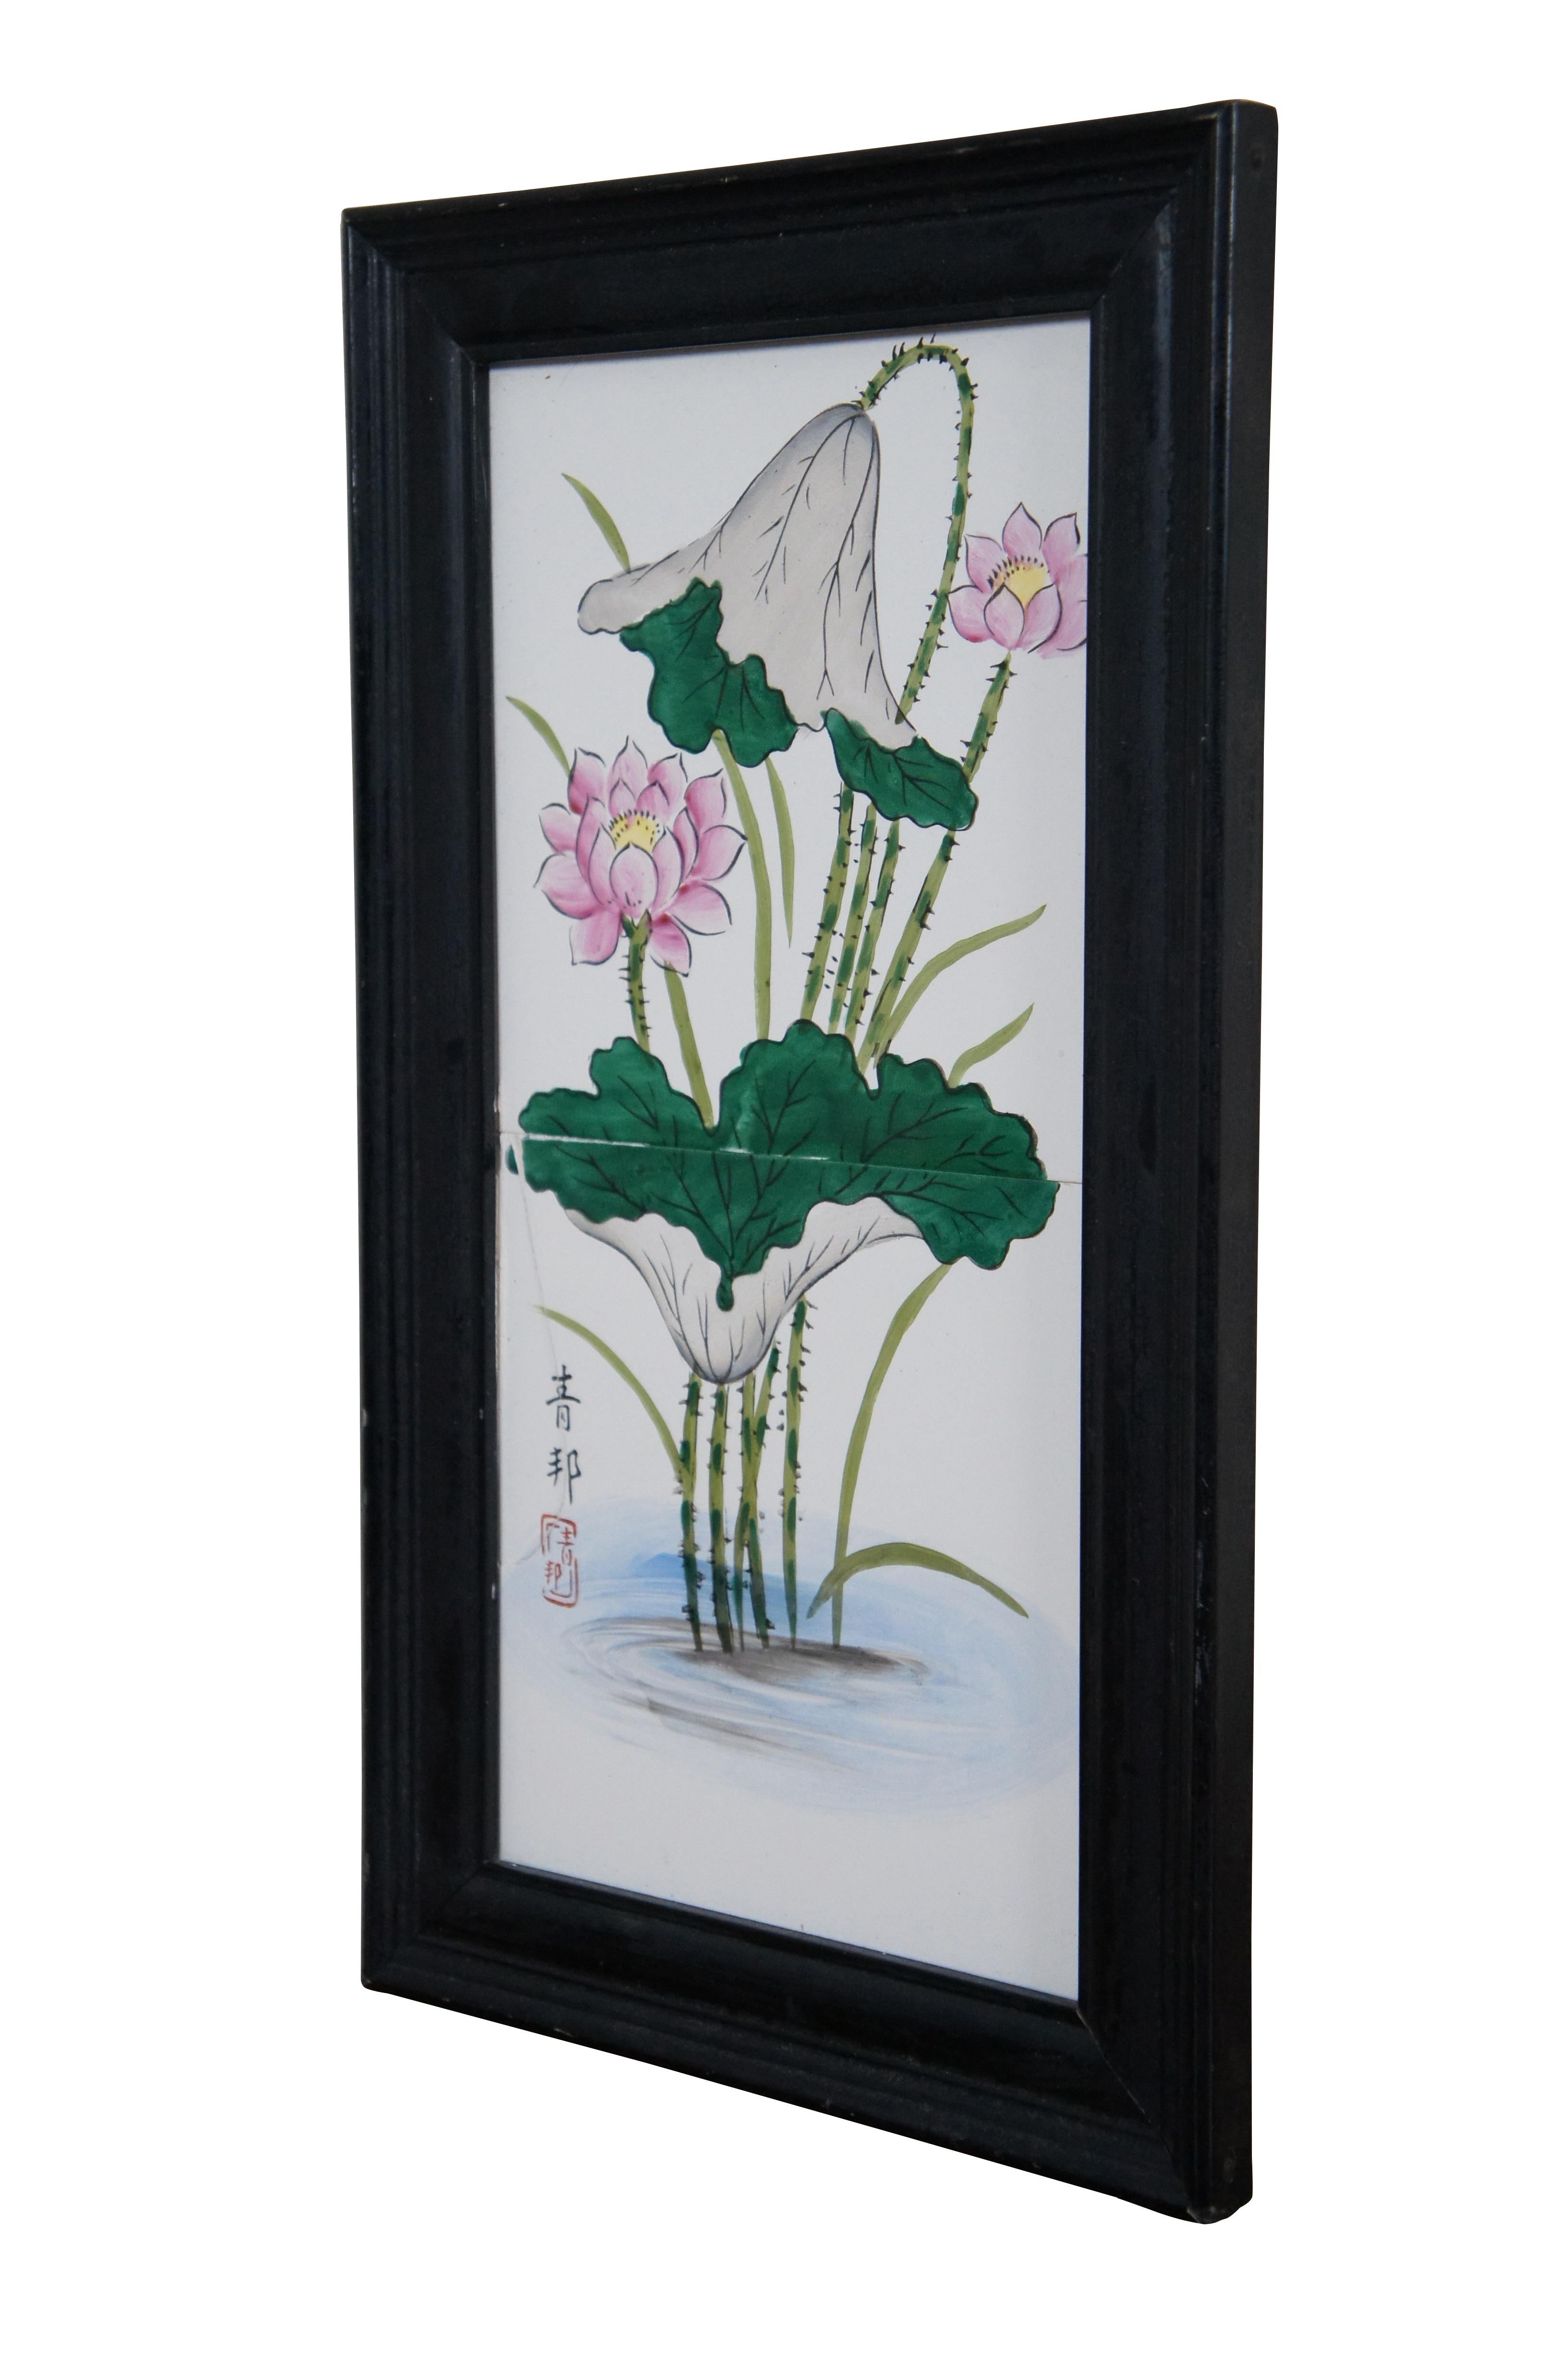 Vintage white porcelain Chinese tiles hand painted with pink water lilies / lily pads / lotus flowers. Signed on left hand side. Black beveled wood frame.

Dimensions:
8